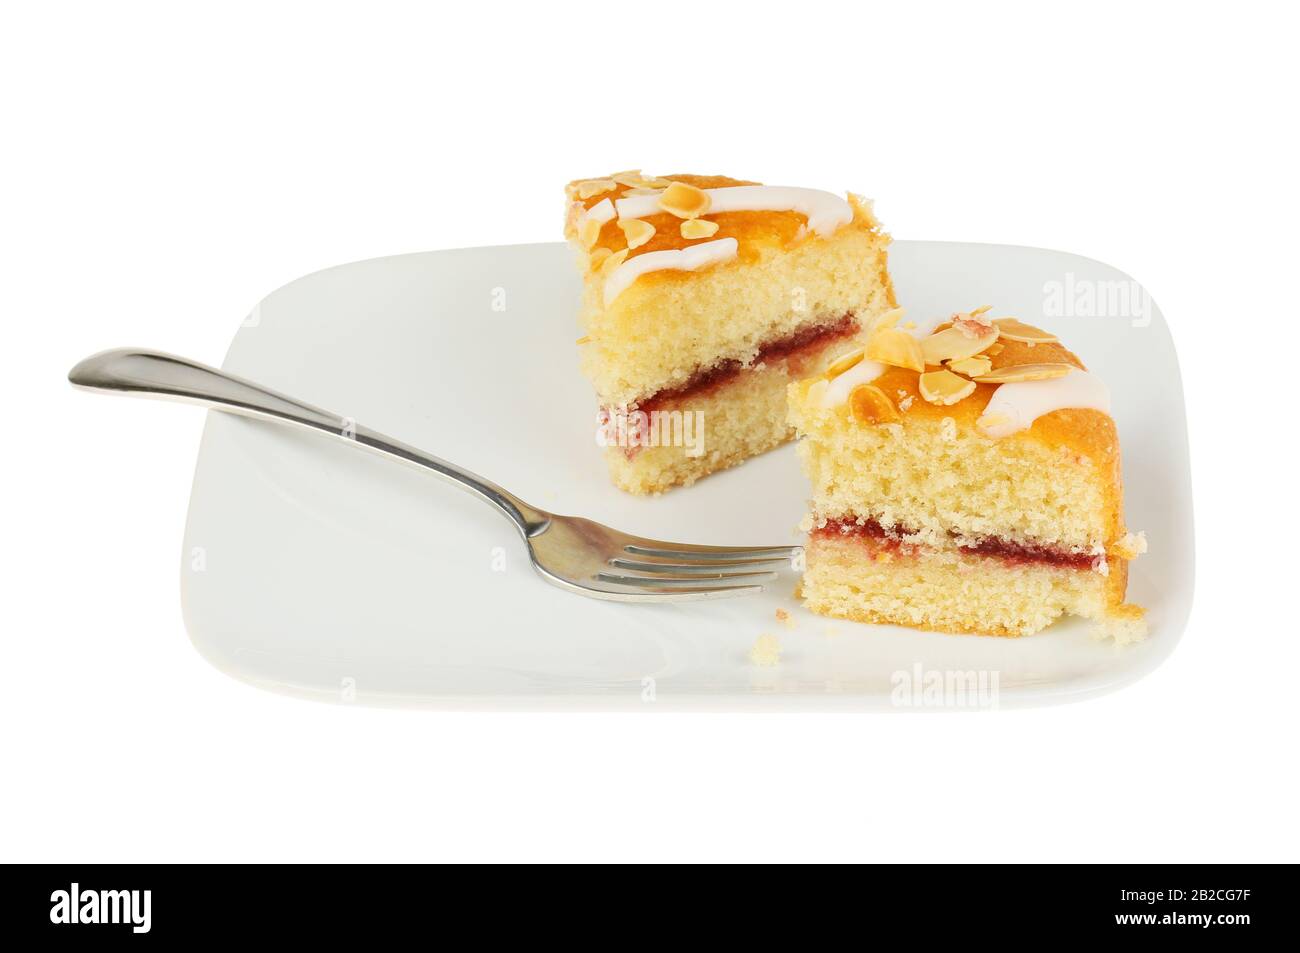 Bakewell cake with a fork on aplate isolated against white Stock Photo